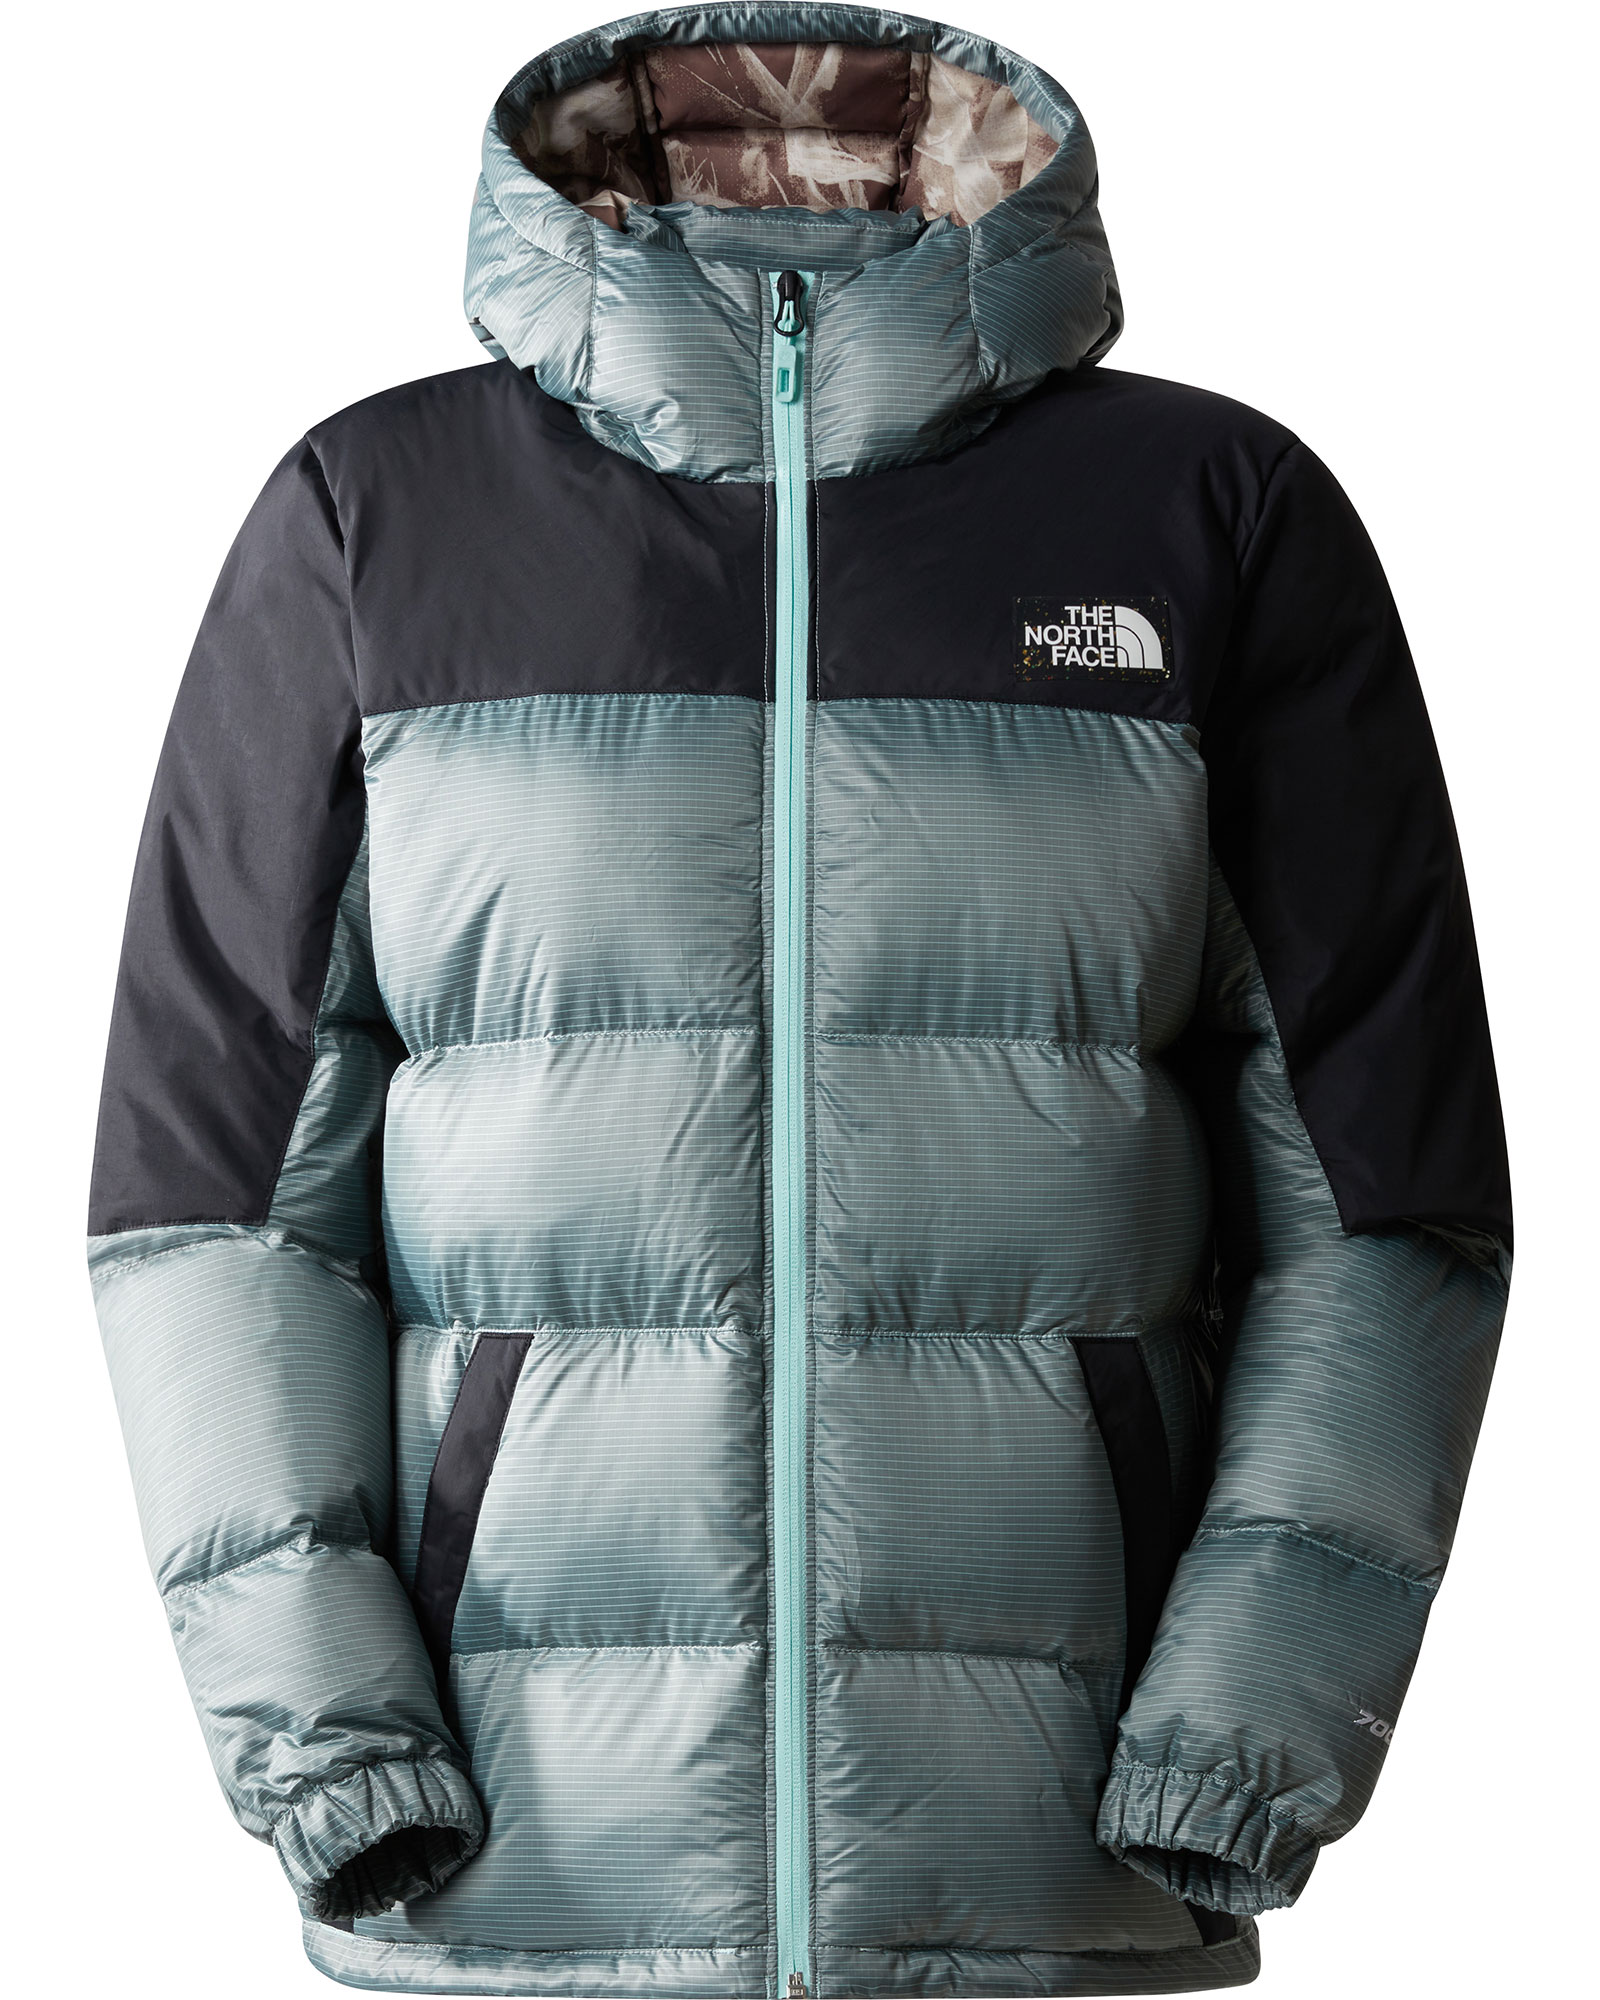 The North Face Diablo Recycled Women’s Down Hoodie - Powder Teal-TNF Black XS